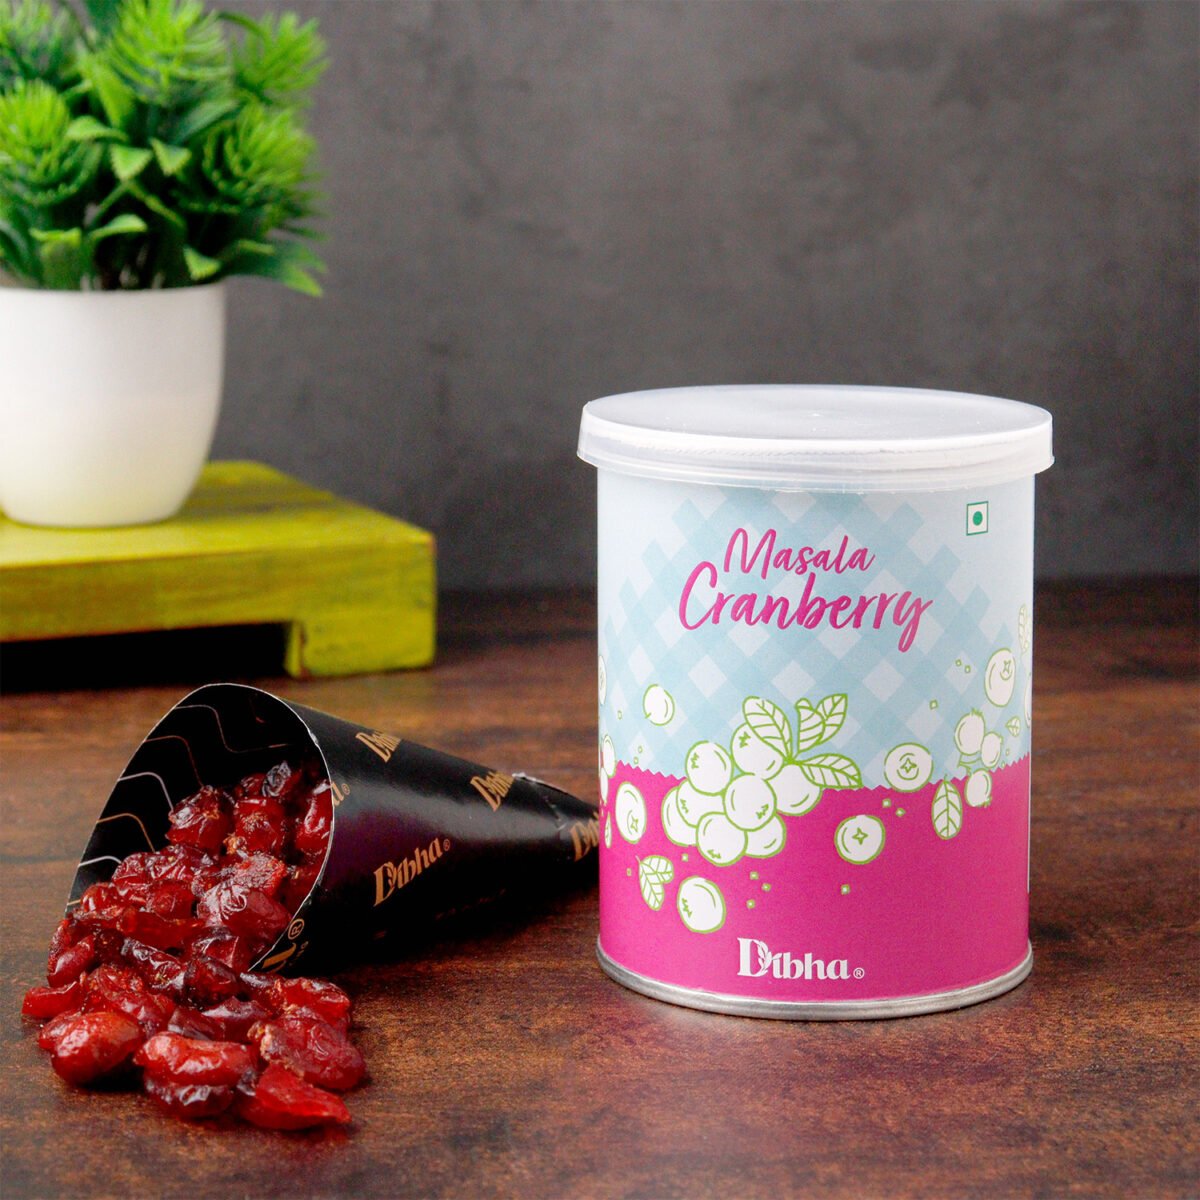 Honest Snacking Dried Masala Cranberry, Chilli Guava & Masala Kiwi( Pack Of 3) Sweet & Tasty Dehydrated 300 gm front-Dibha